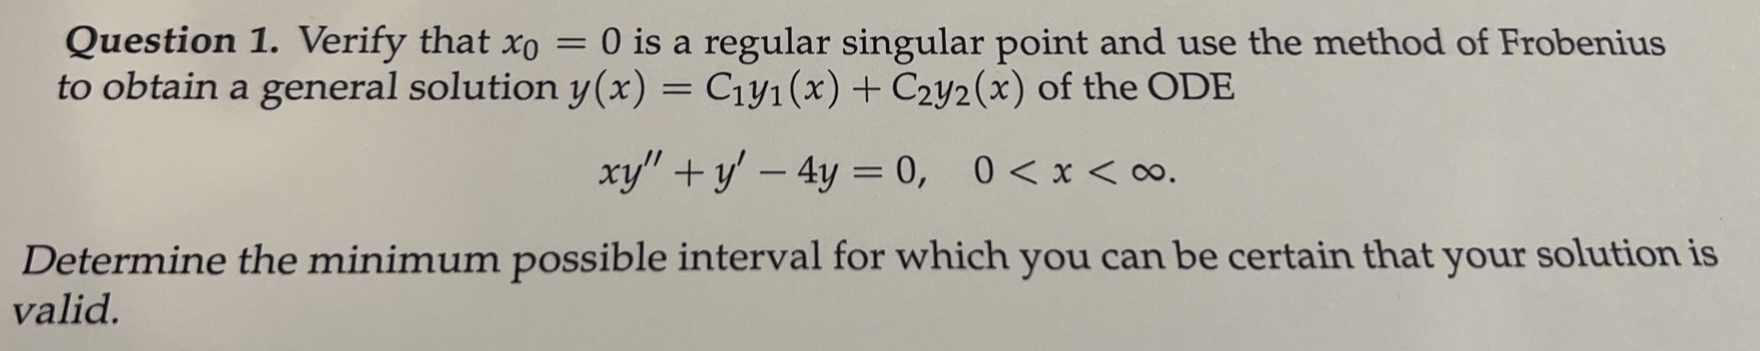 Question 1. Verify that \( x_{0}=0 \) is a regular singular point and use the method of Frobenius to obtain a general solutio